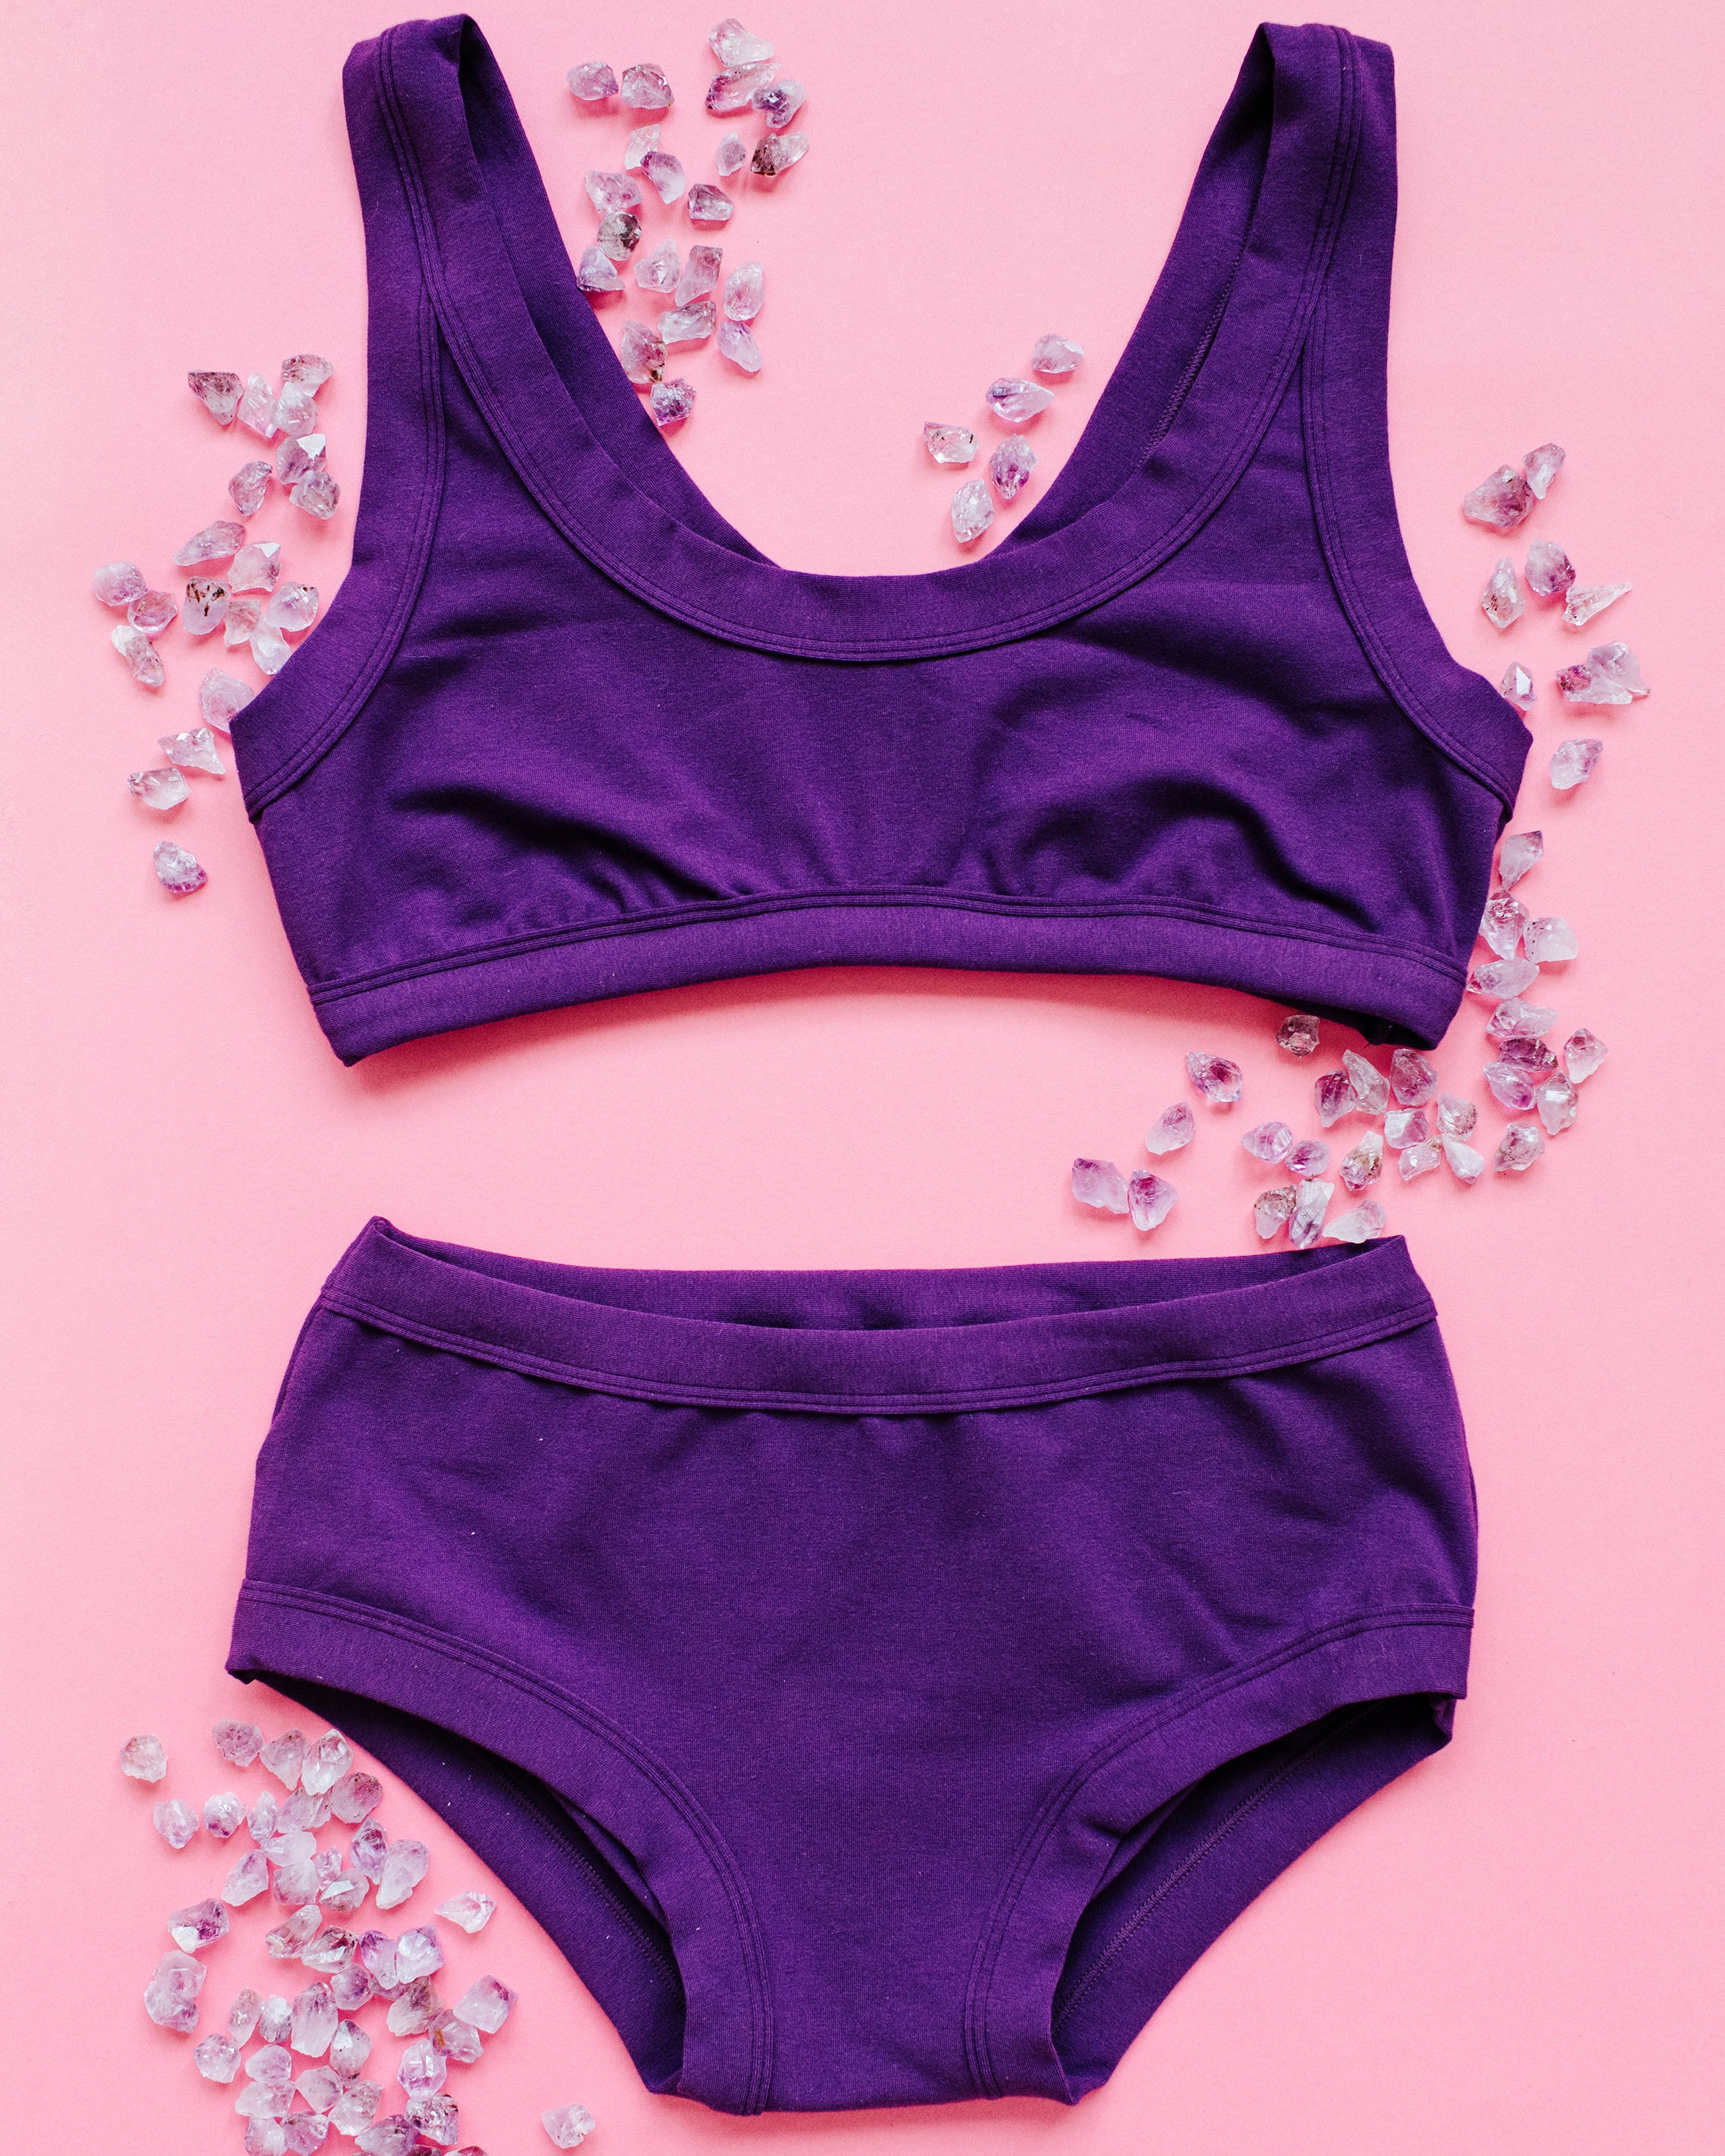 Flat lay of purple Deep Amethyst Hipster style underwear and Bralette on a pink surface with small amethyst stones surrounding.